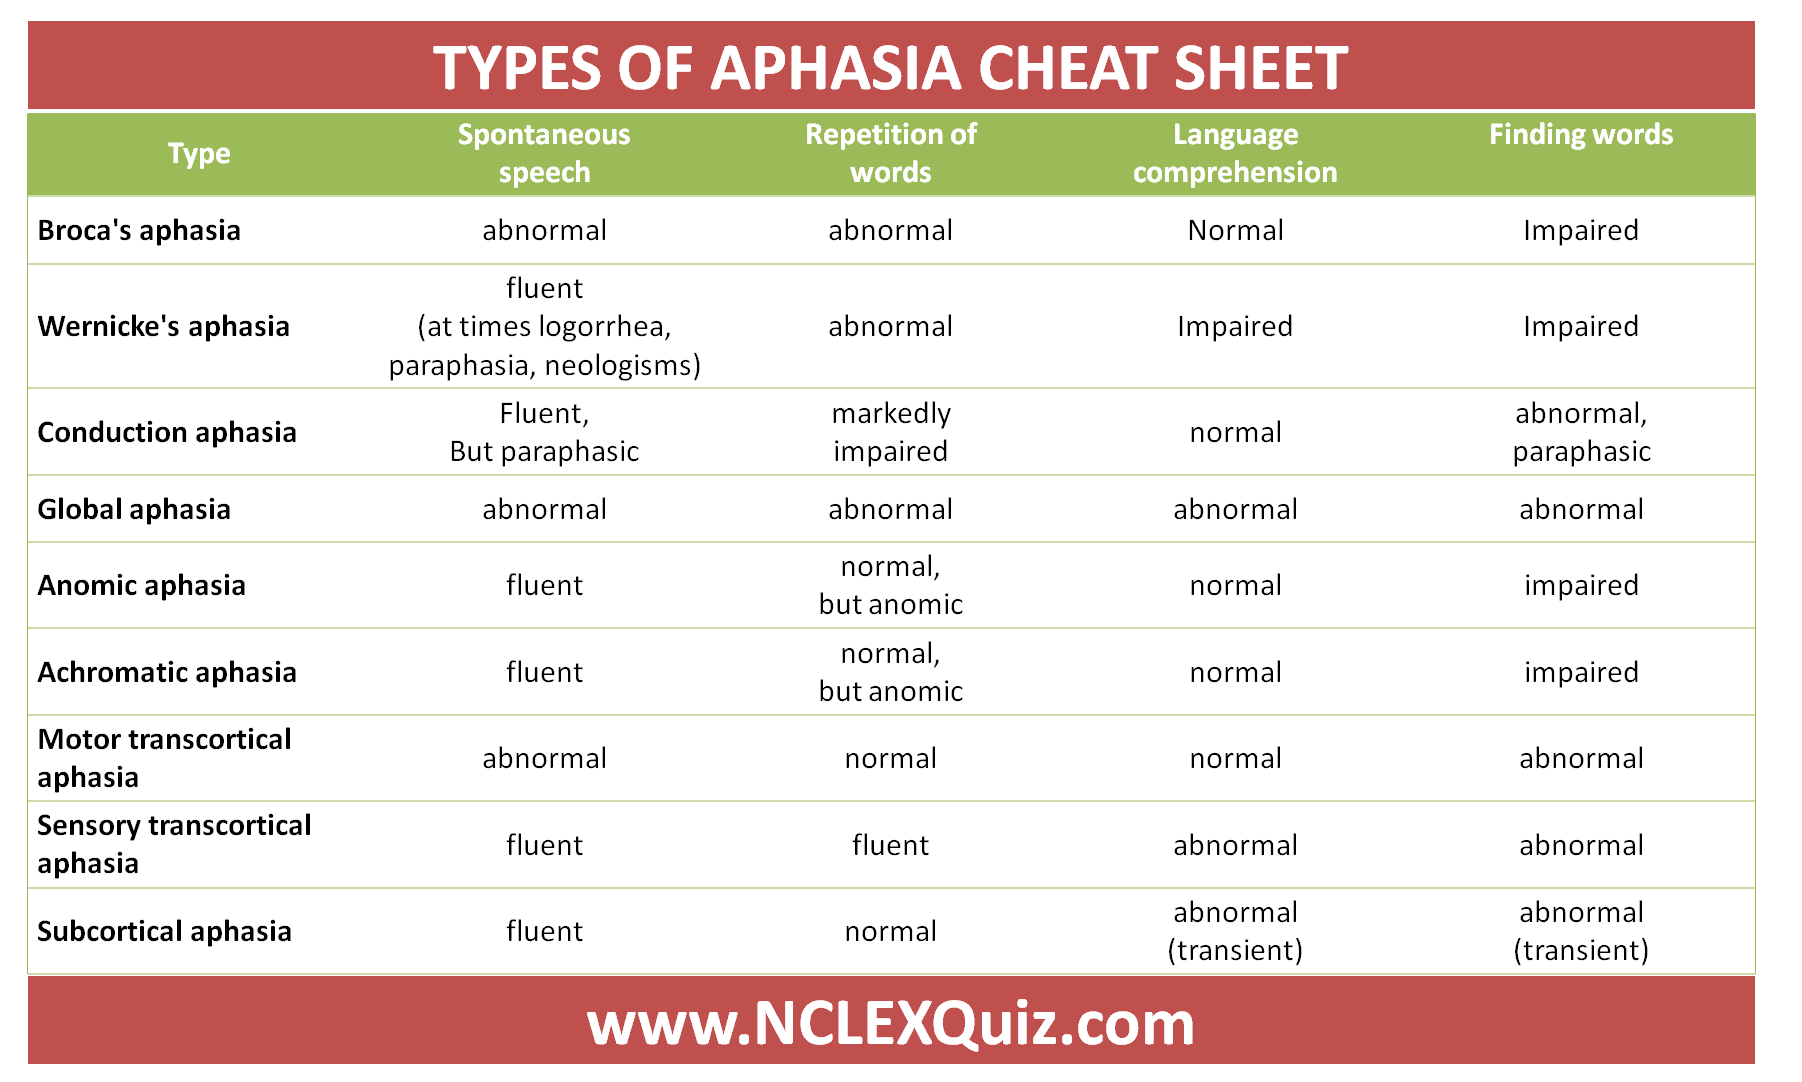 Clear Description of Aphasia Types Cheat Sheet